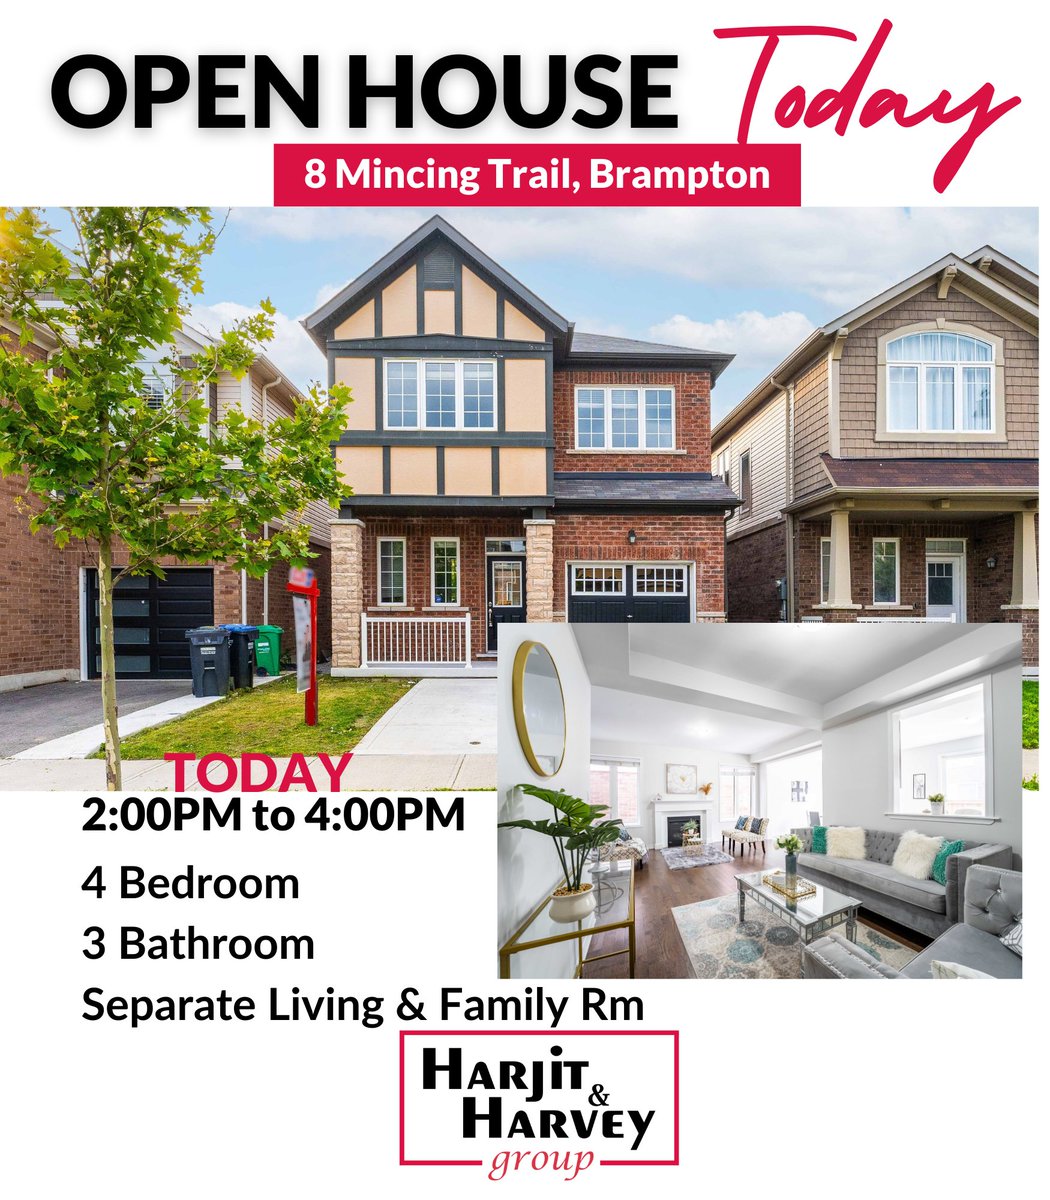 Open House Happening Today! Come by to take a look at this detached home in Northwest Brampton. #HarjitHarvey #harjitharveygroup #harjitsaini #harveysingh #realestatebrampton #bramptonrealestate #yyz #northwestbrampton #openhouse #homesforsale #Brampton #openhousebrampton